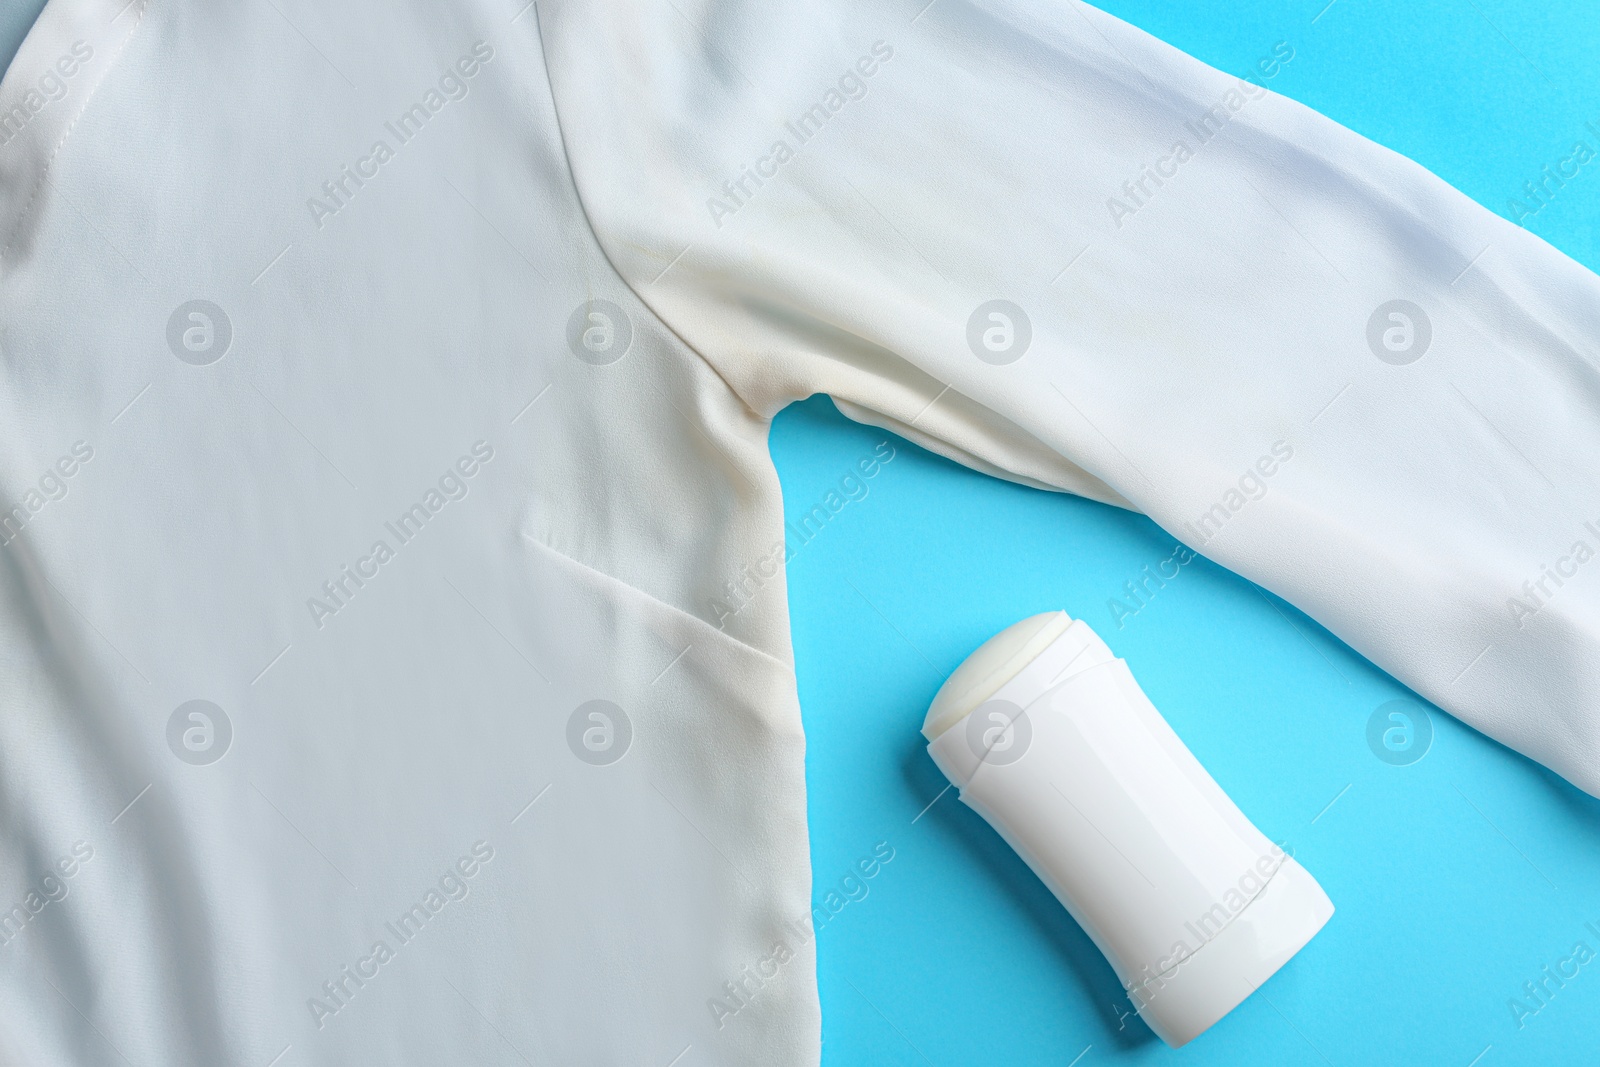 Photo of Clothes with stain and deodorant on light blue background, top view